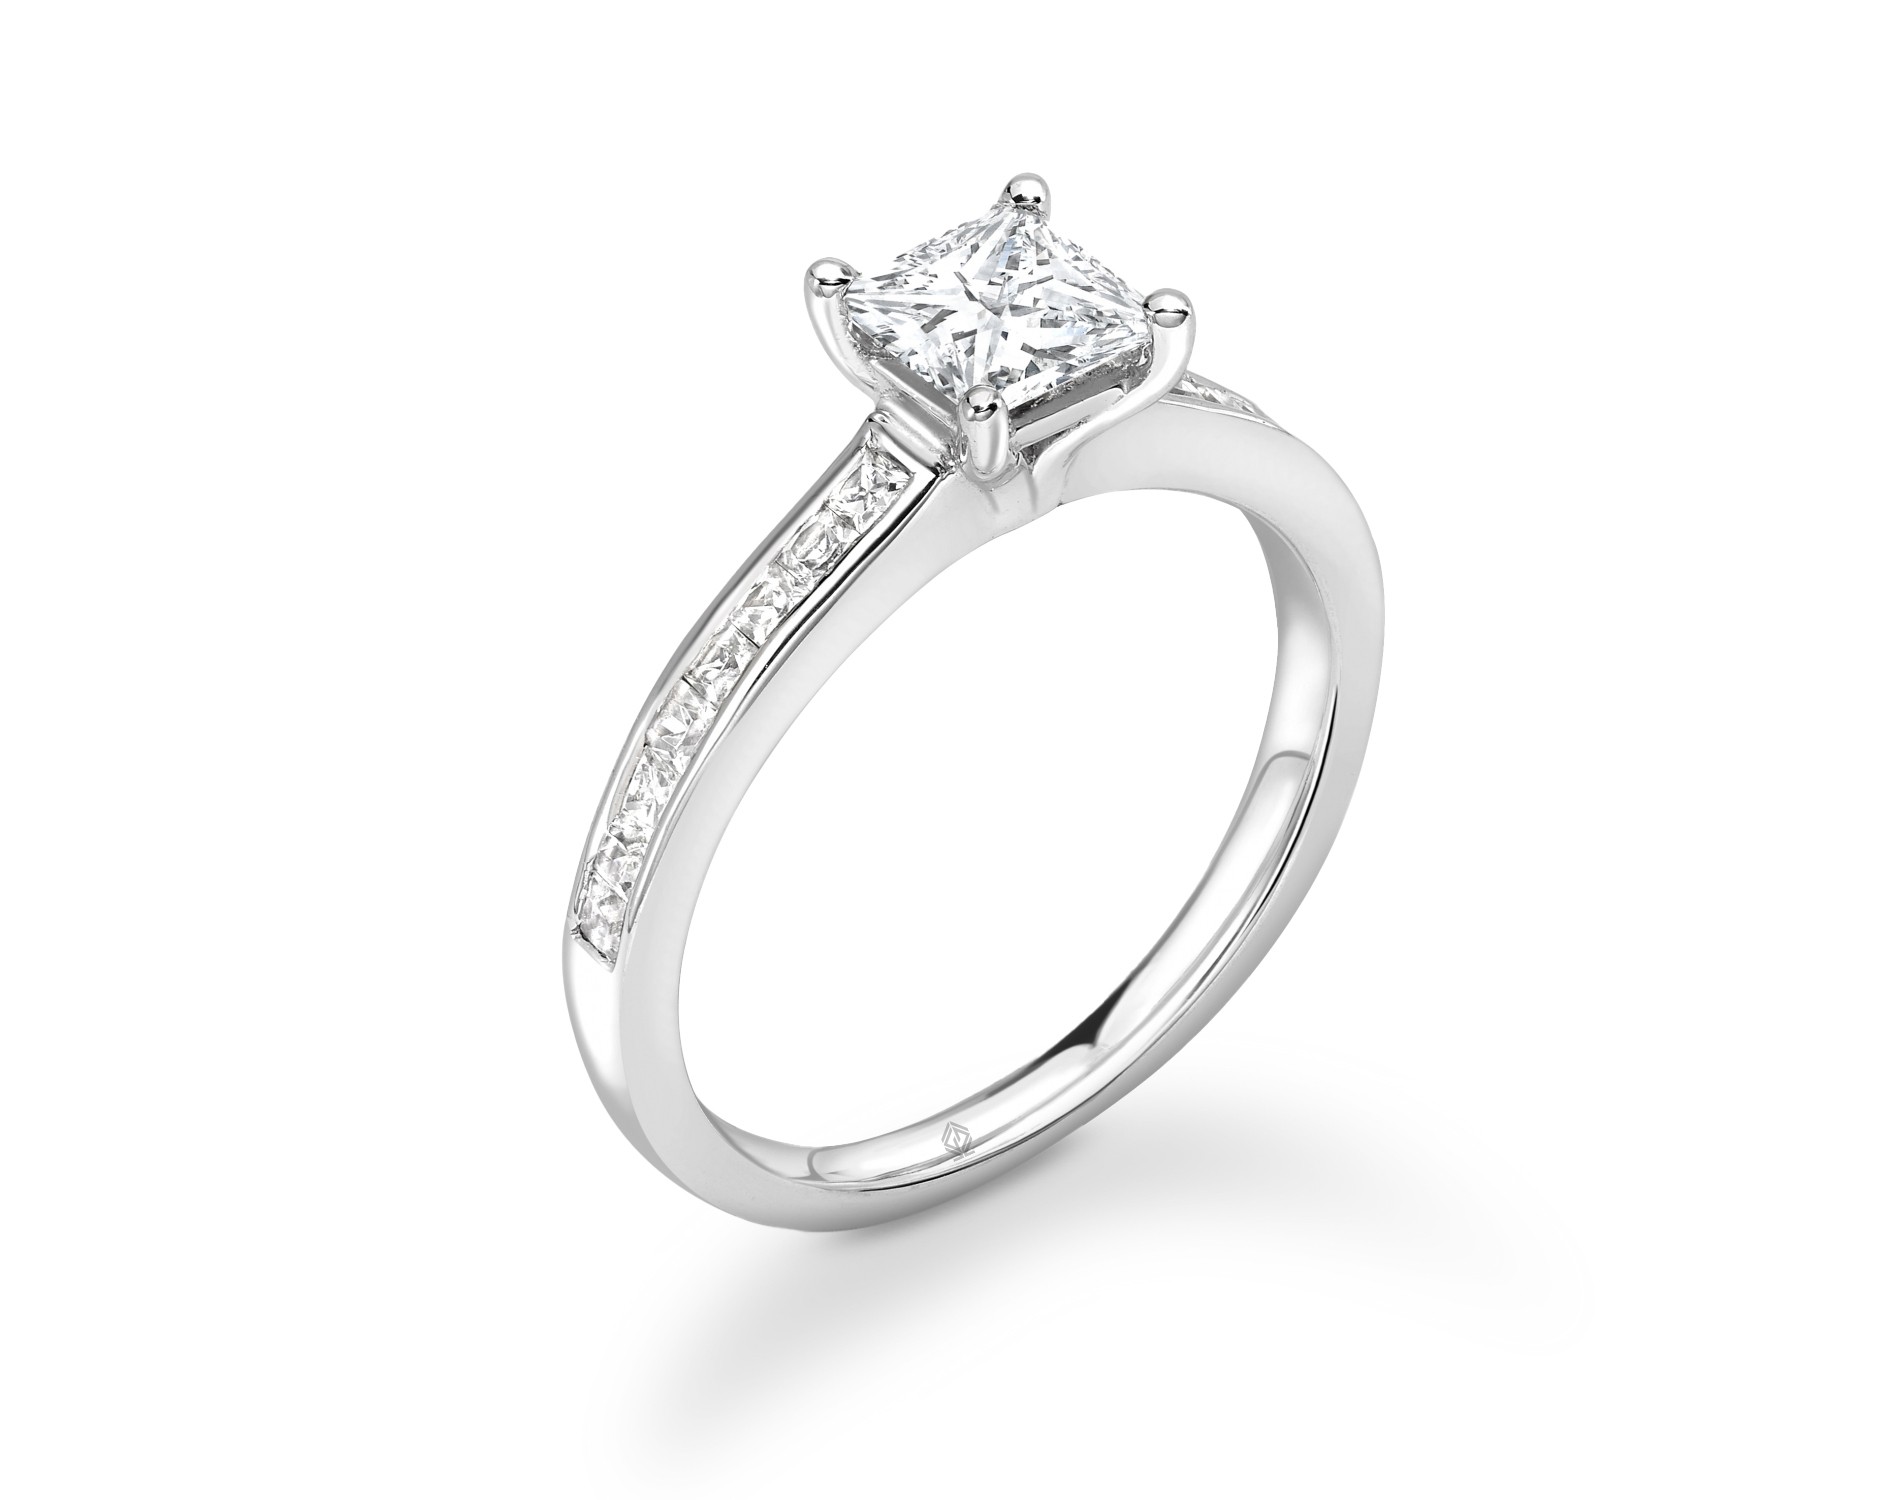 18K WHITE GOLD 4 PRONGS PRINCESS CUT DIAMOND ENGAGEMENT RING WITH SIDE STONES CHANNEL SET